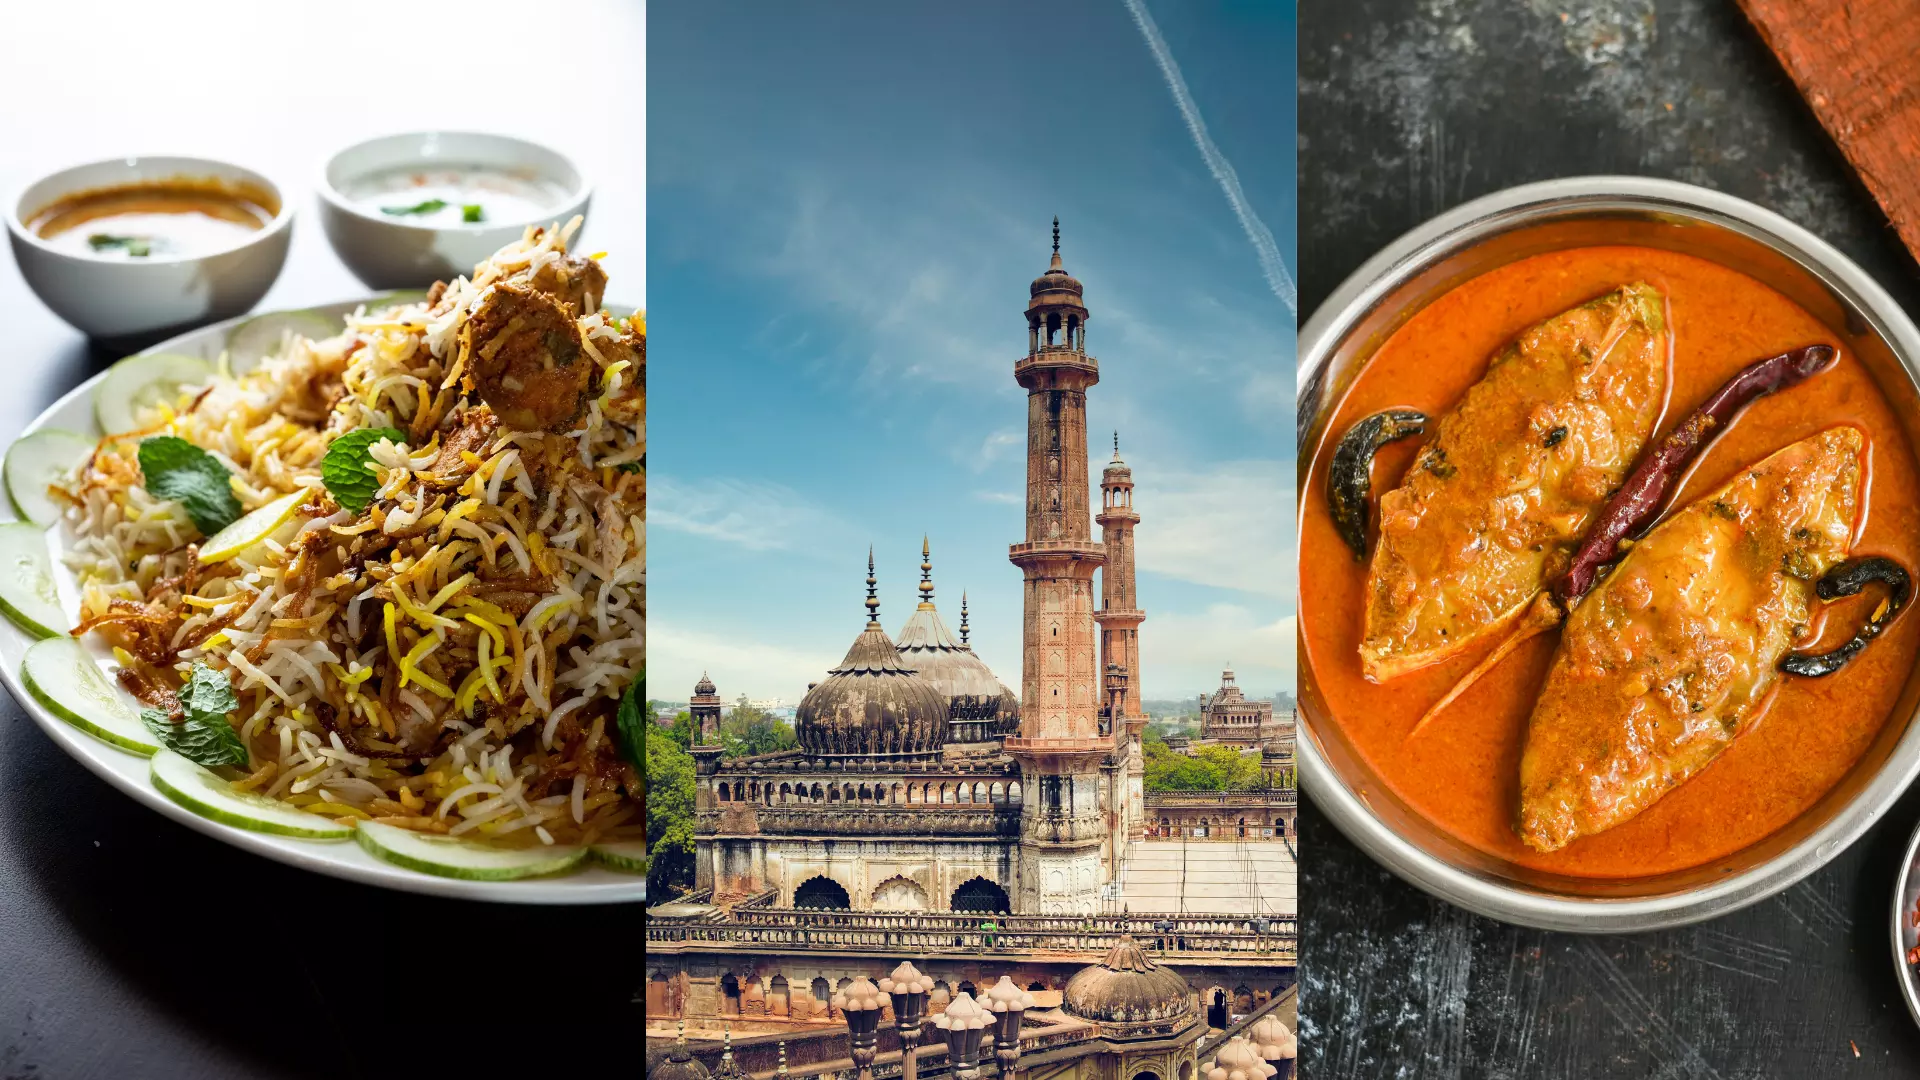 Join us as we take you through 7 destinations in India perfect for tripping on food and travel